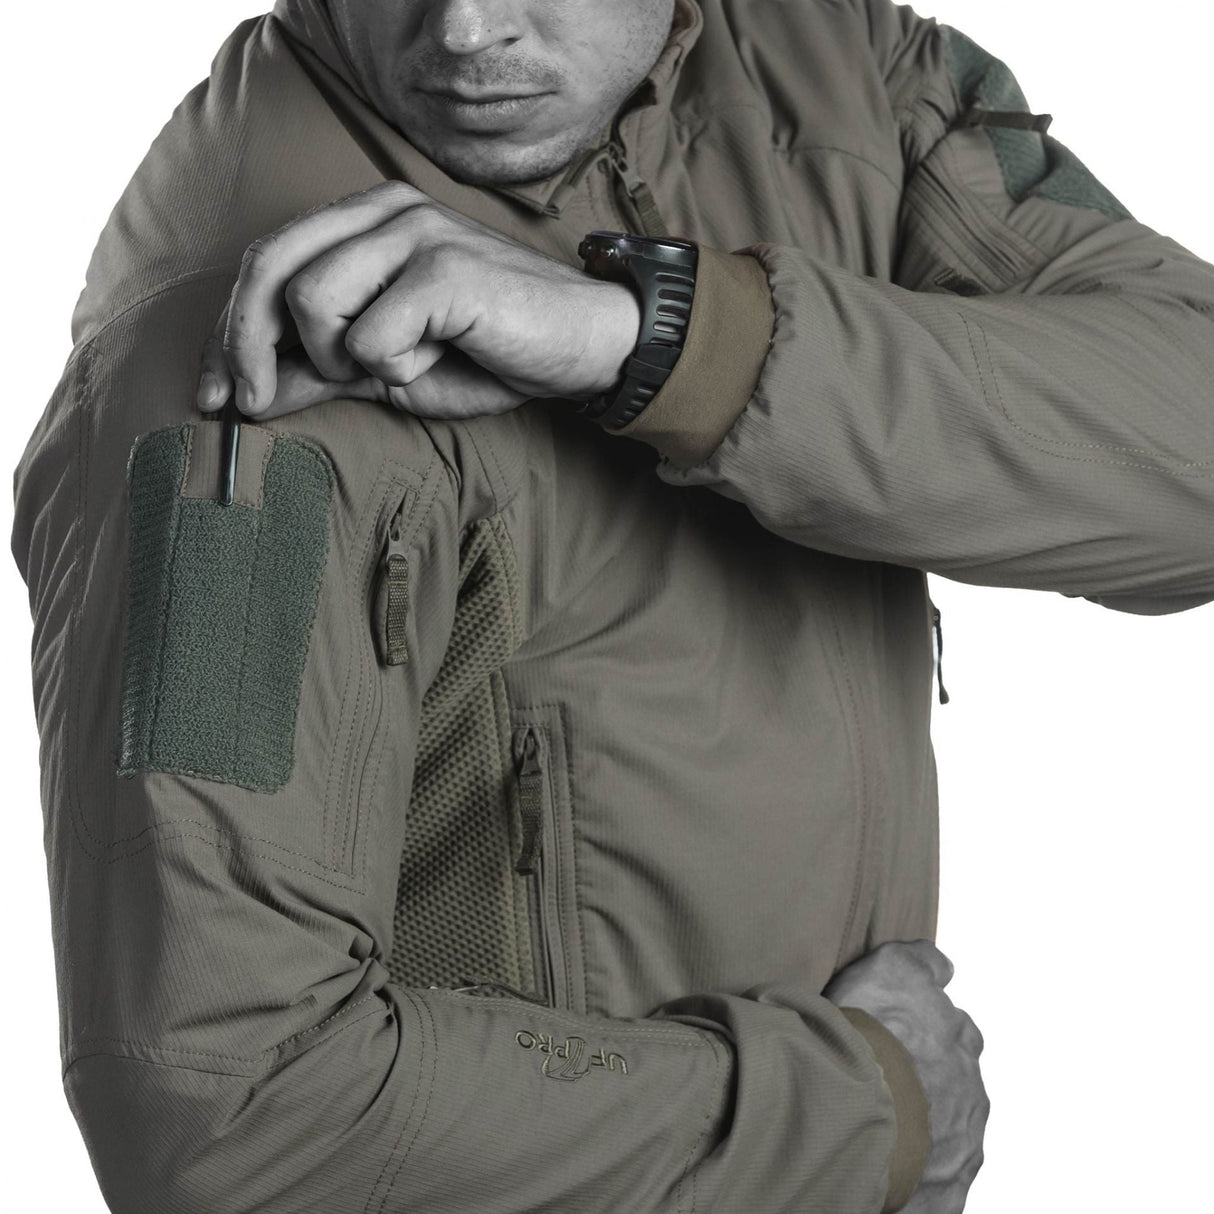 Tactical Jacket: Ideal for Military & First Responders.